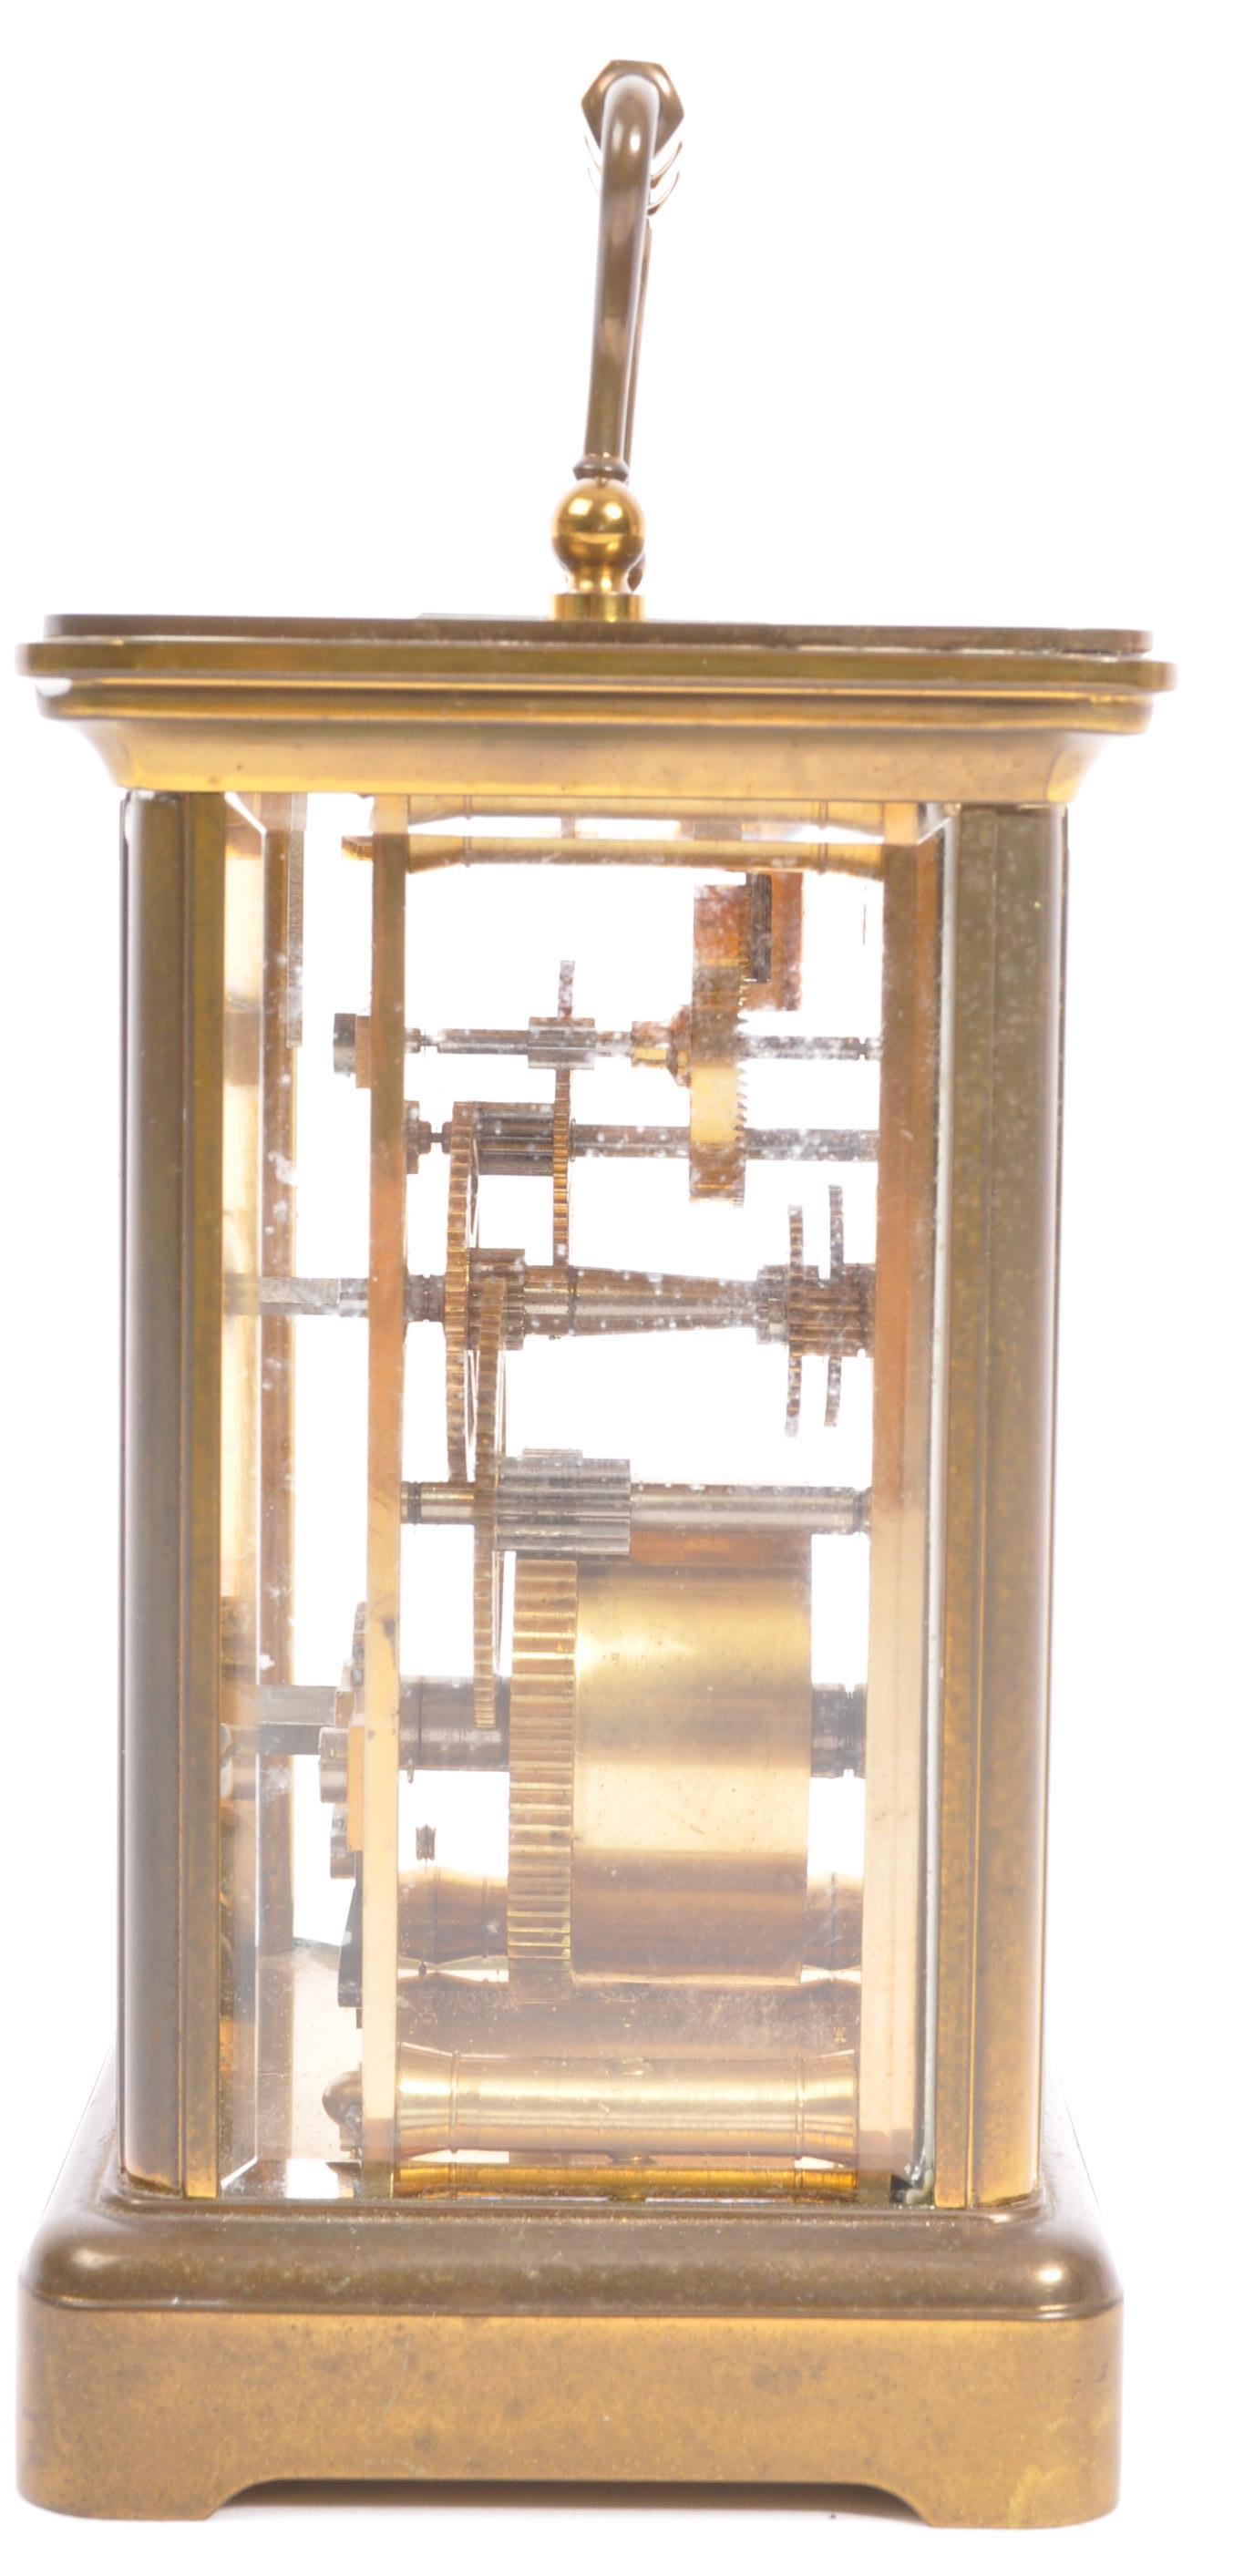 TWO EARLY 20TH CENTURY BRASS CARRIAGE CLOCK - Image 6 of 7